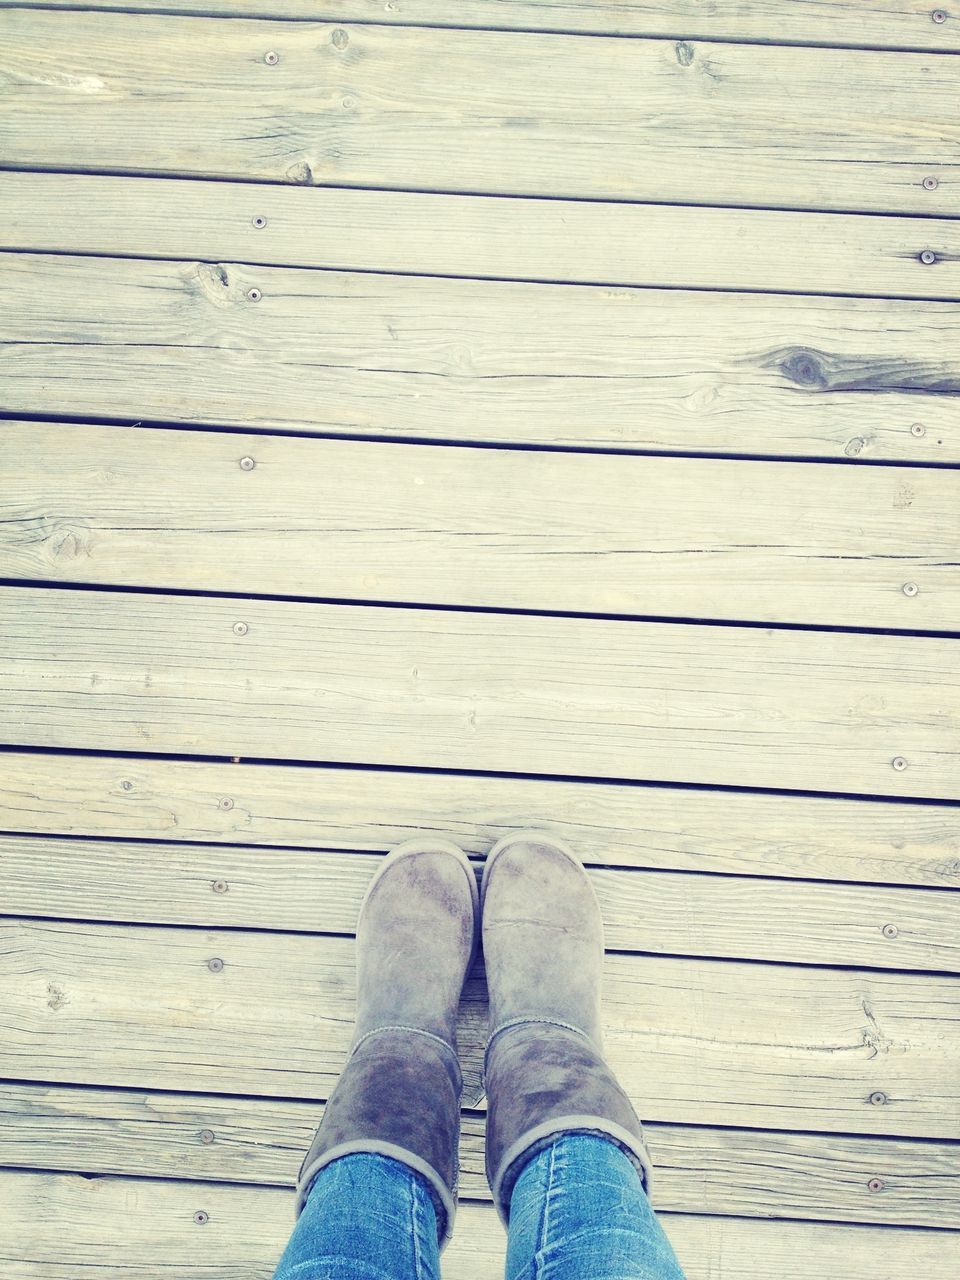 wood - material, wooden, plank, wood, one person, shoe, low section, boardwalk, part of, close-up, high angle view, person, personal perspective, textured, brown, standing, pier, outdoors, hardwood floor